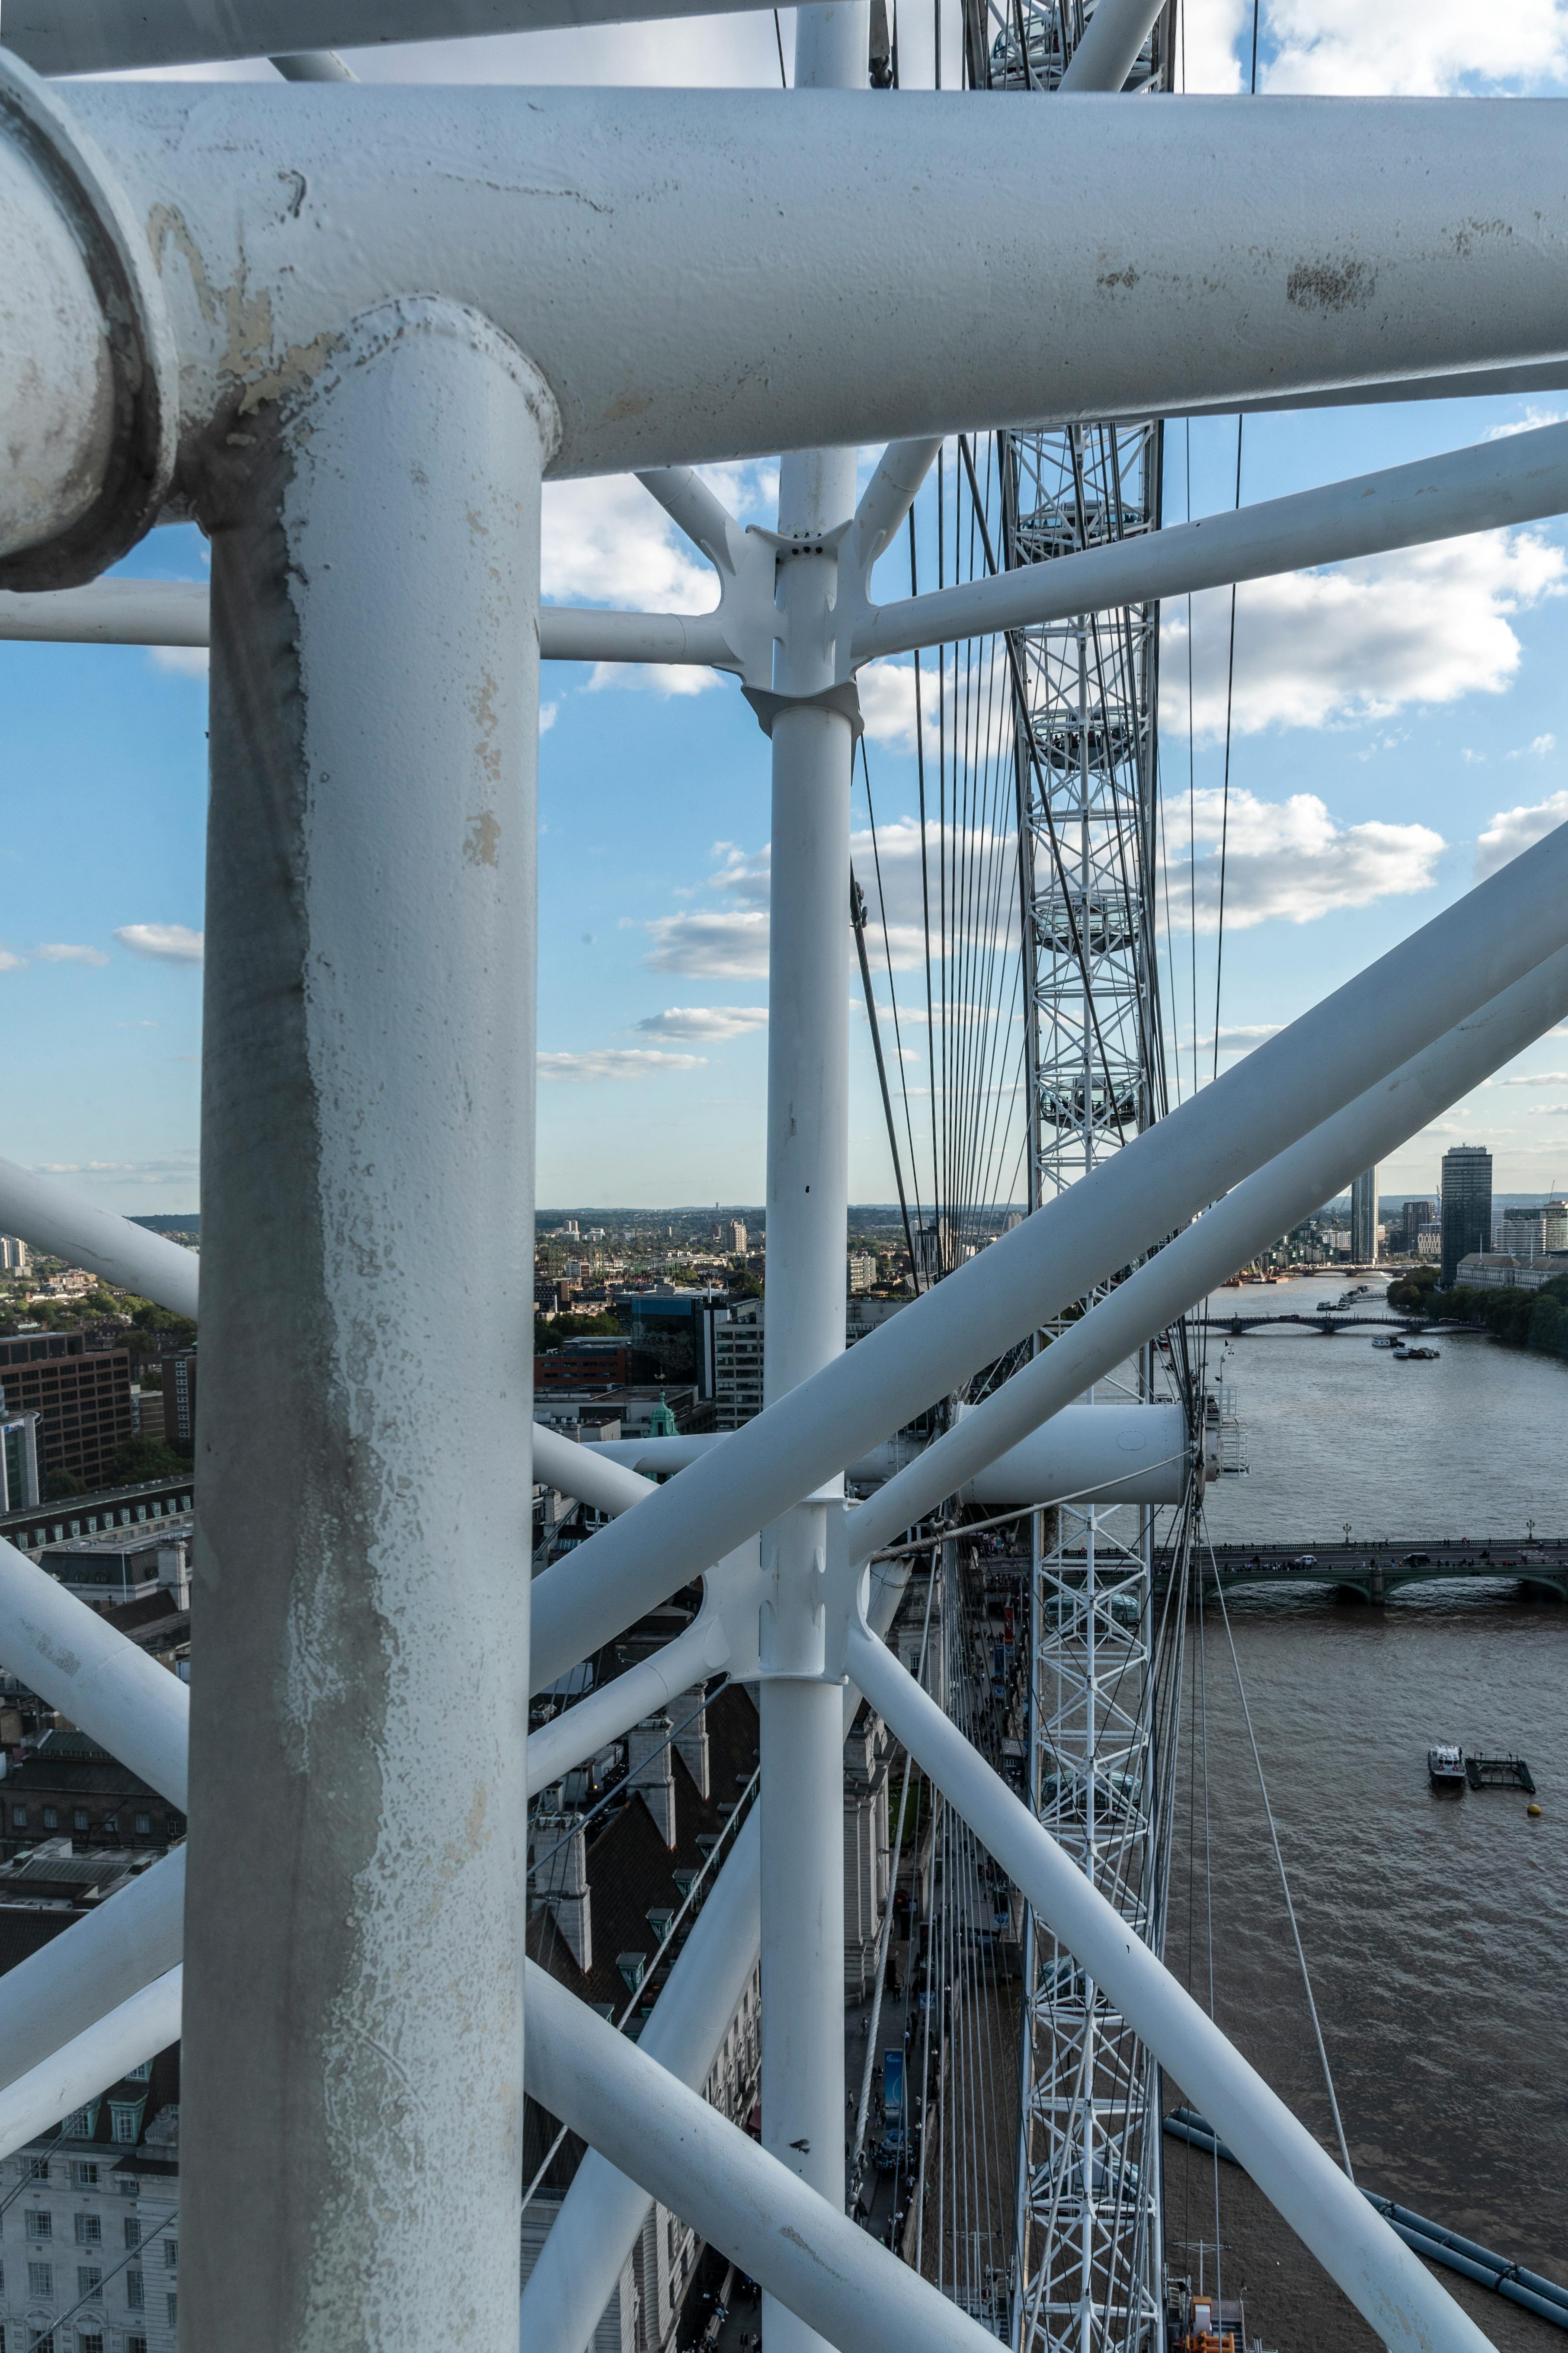 Free stock photo of looking through the London Eye structure